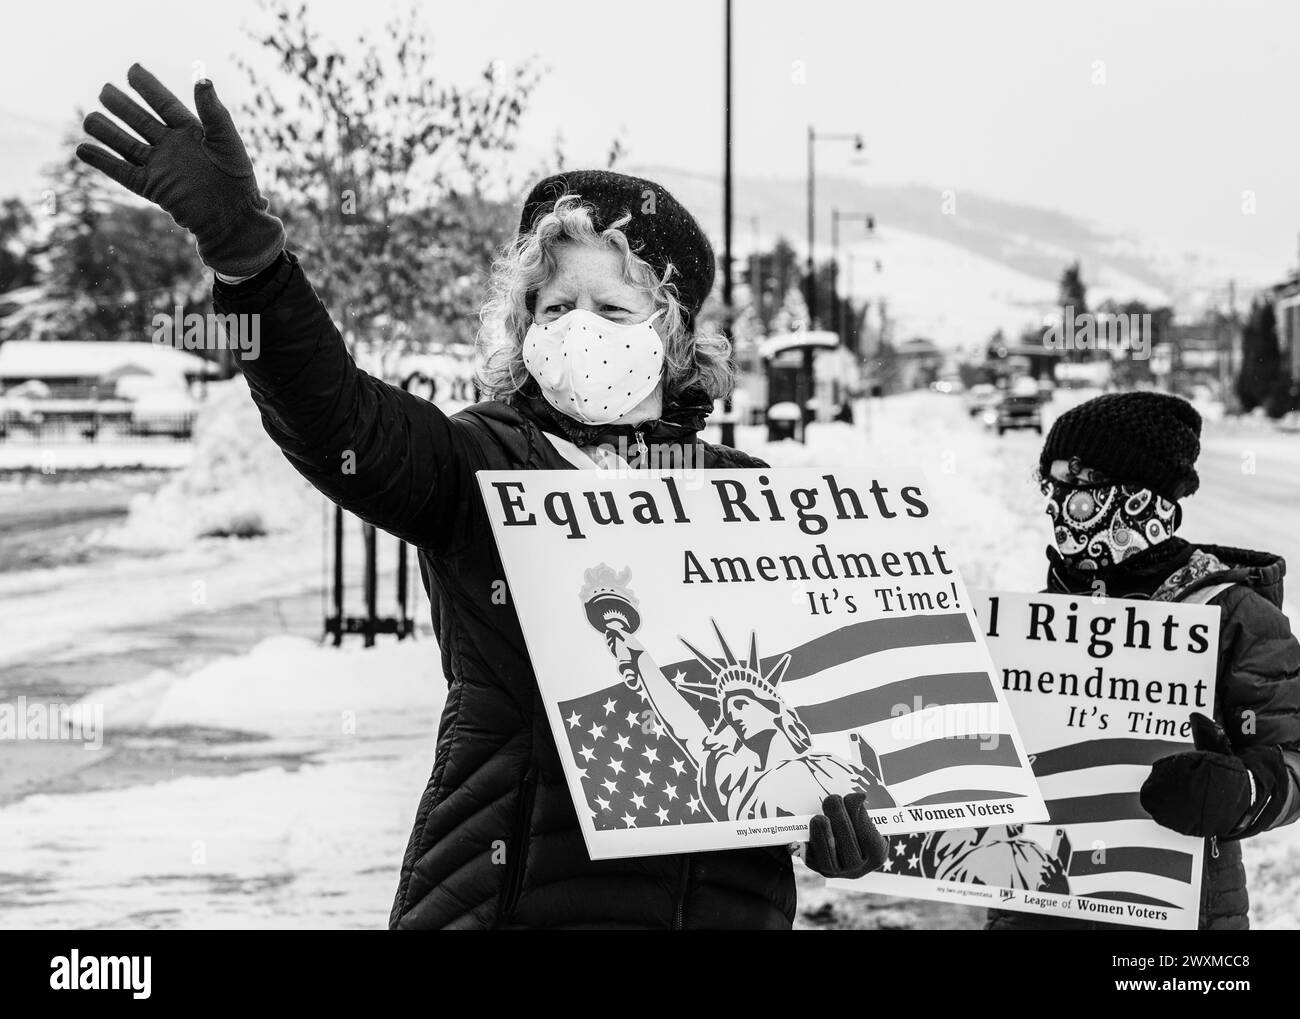 Activists for women voting rights on a winter day in Missoula, Montana Stock Photo